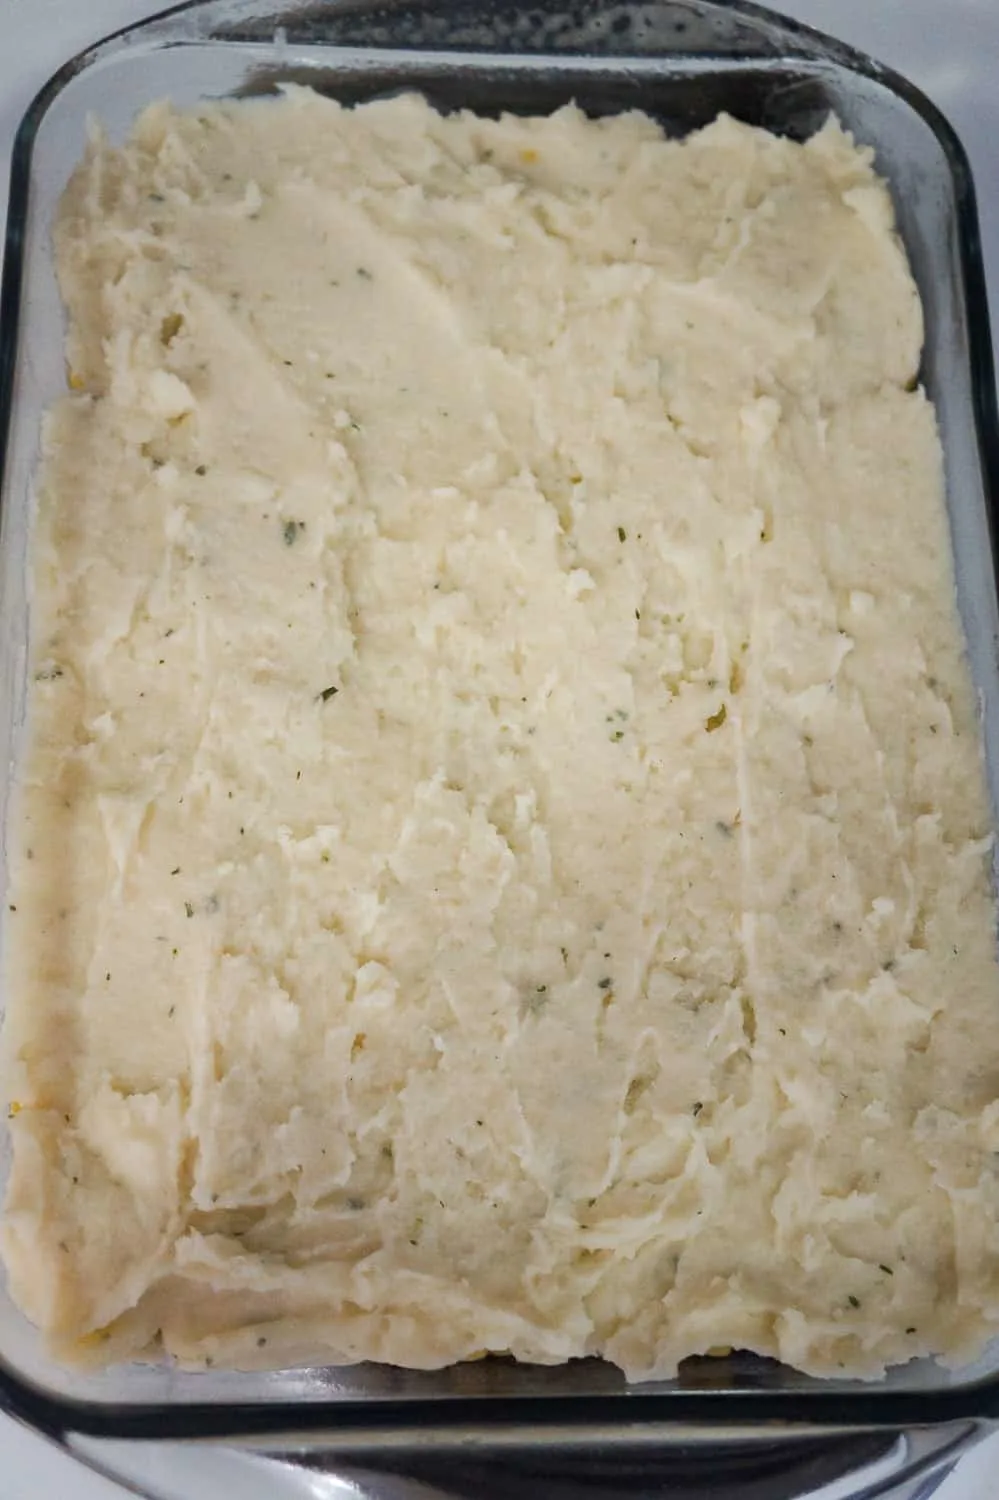 mashed potatoes on top of shepherd's pie before baking